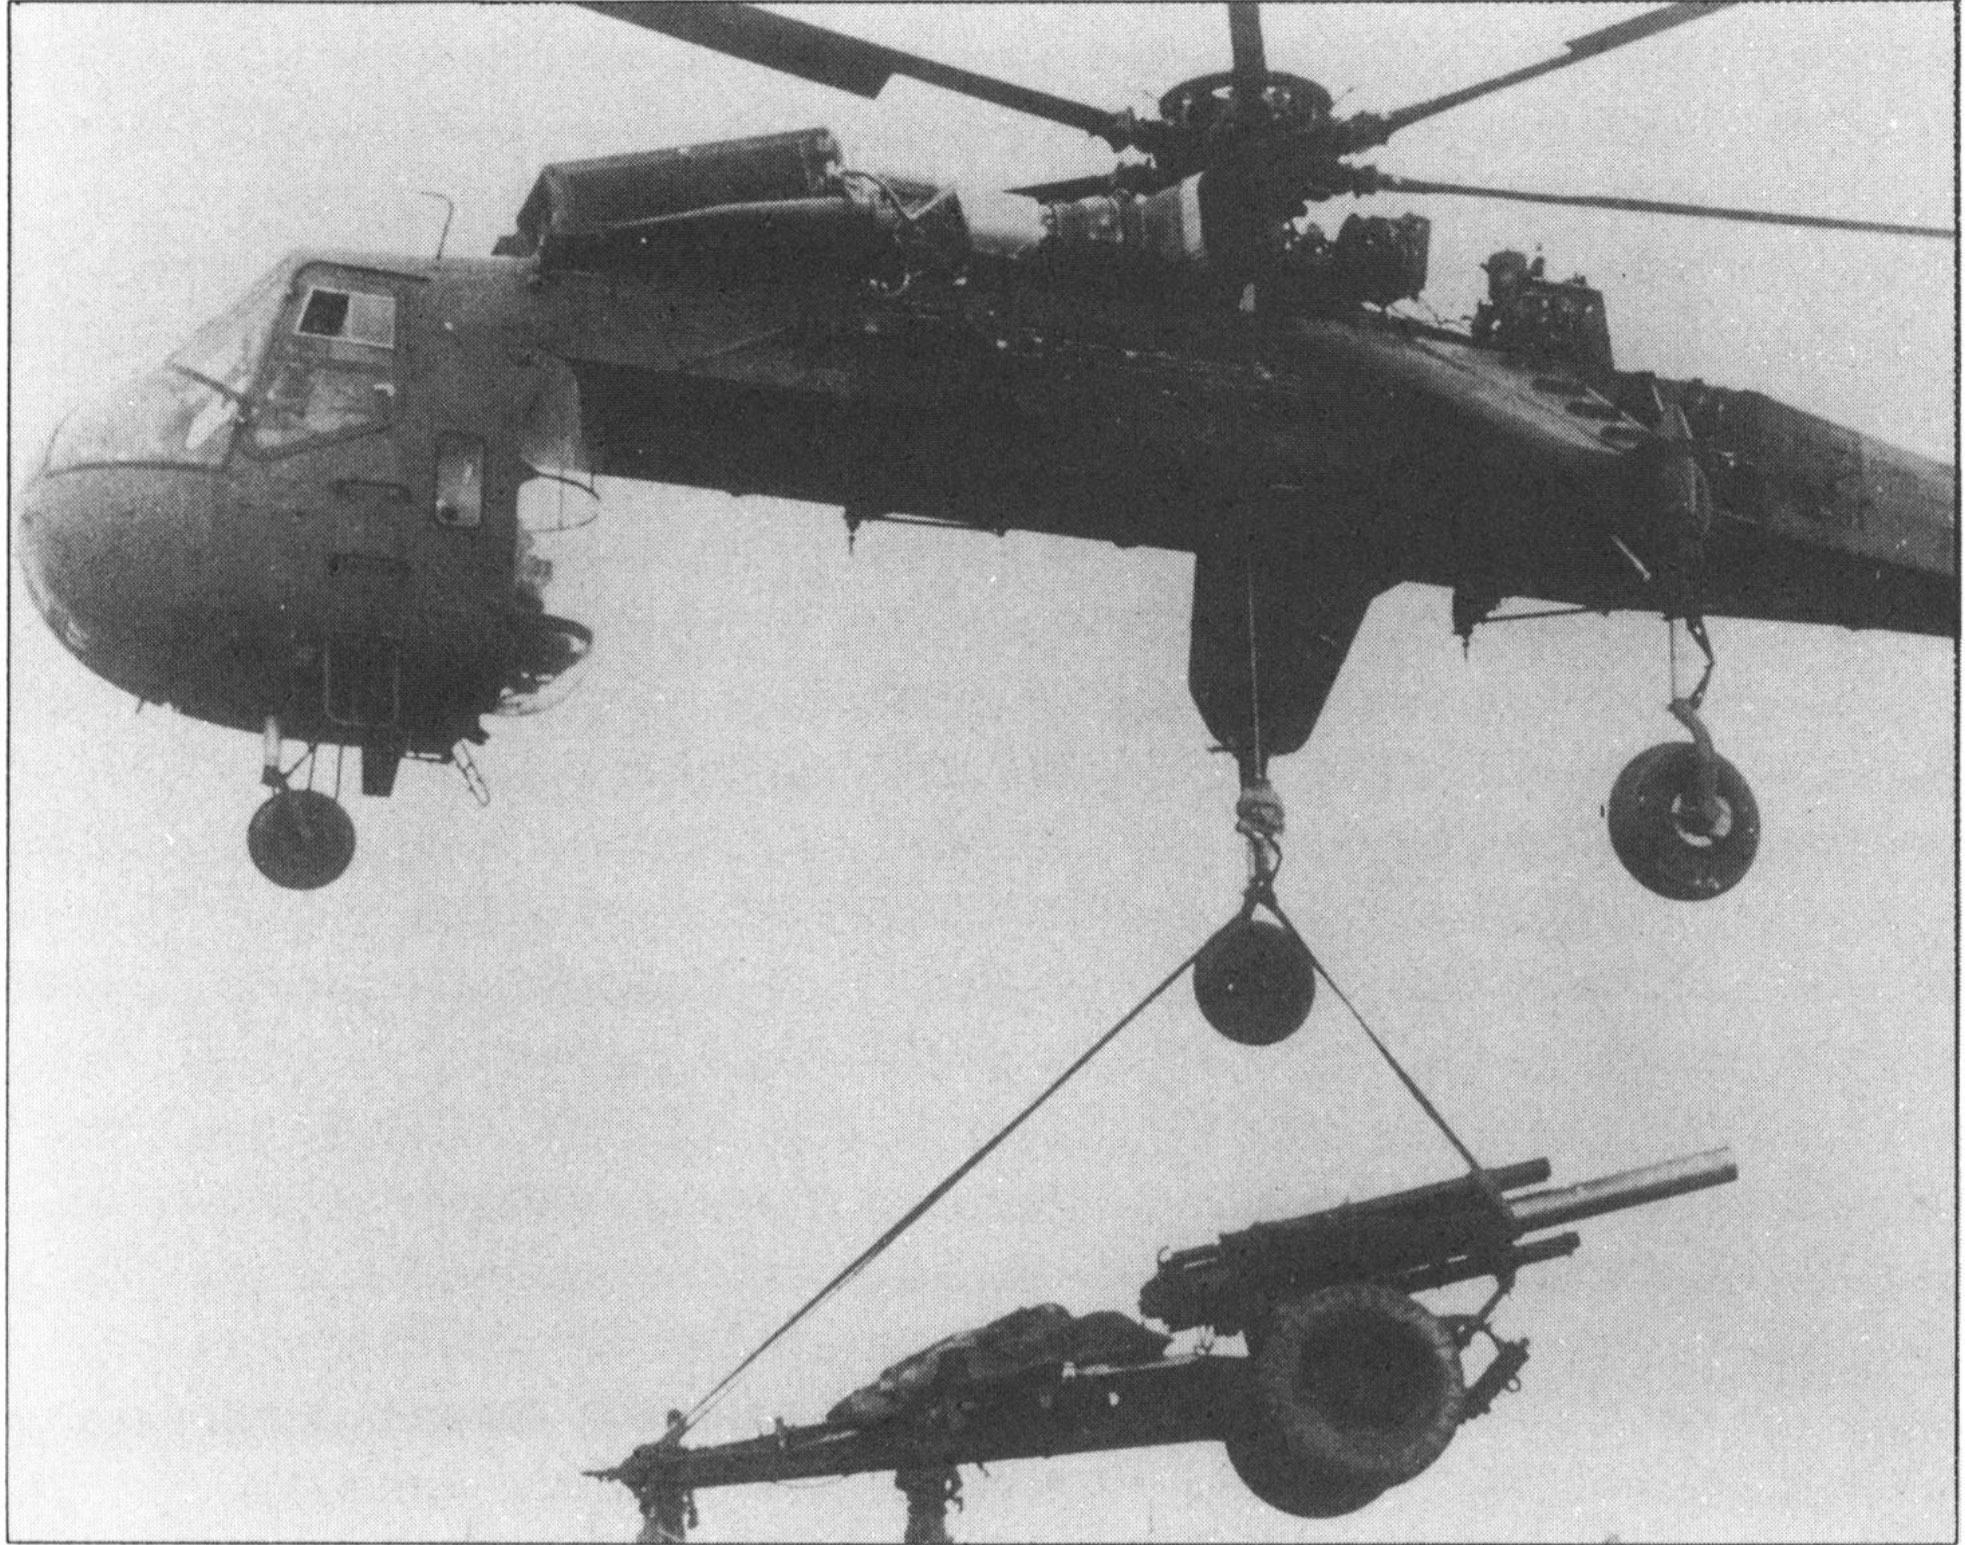 CH-54 Sky Crane (Tarhe) lifting a 105-mm. howitzer at a fire base in Vietnam.